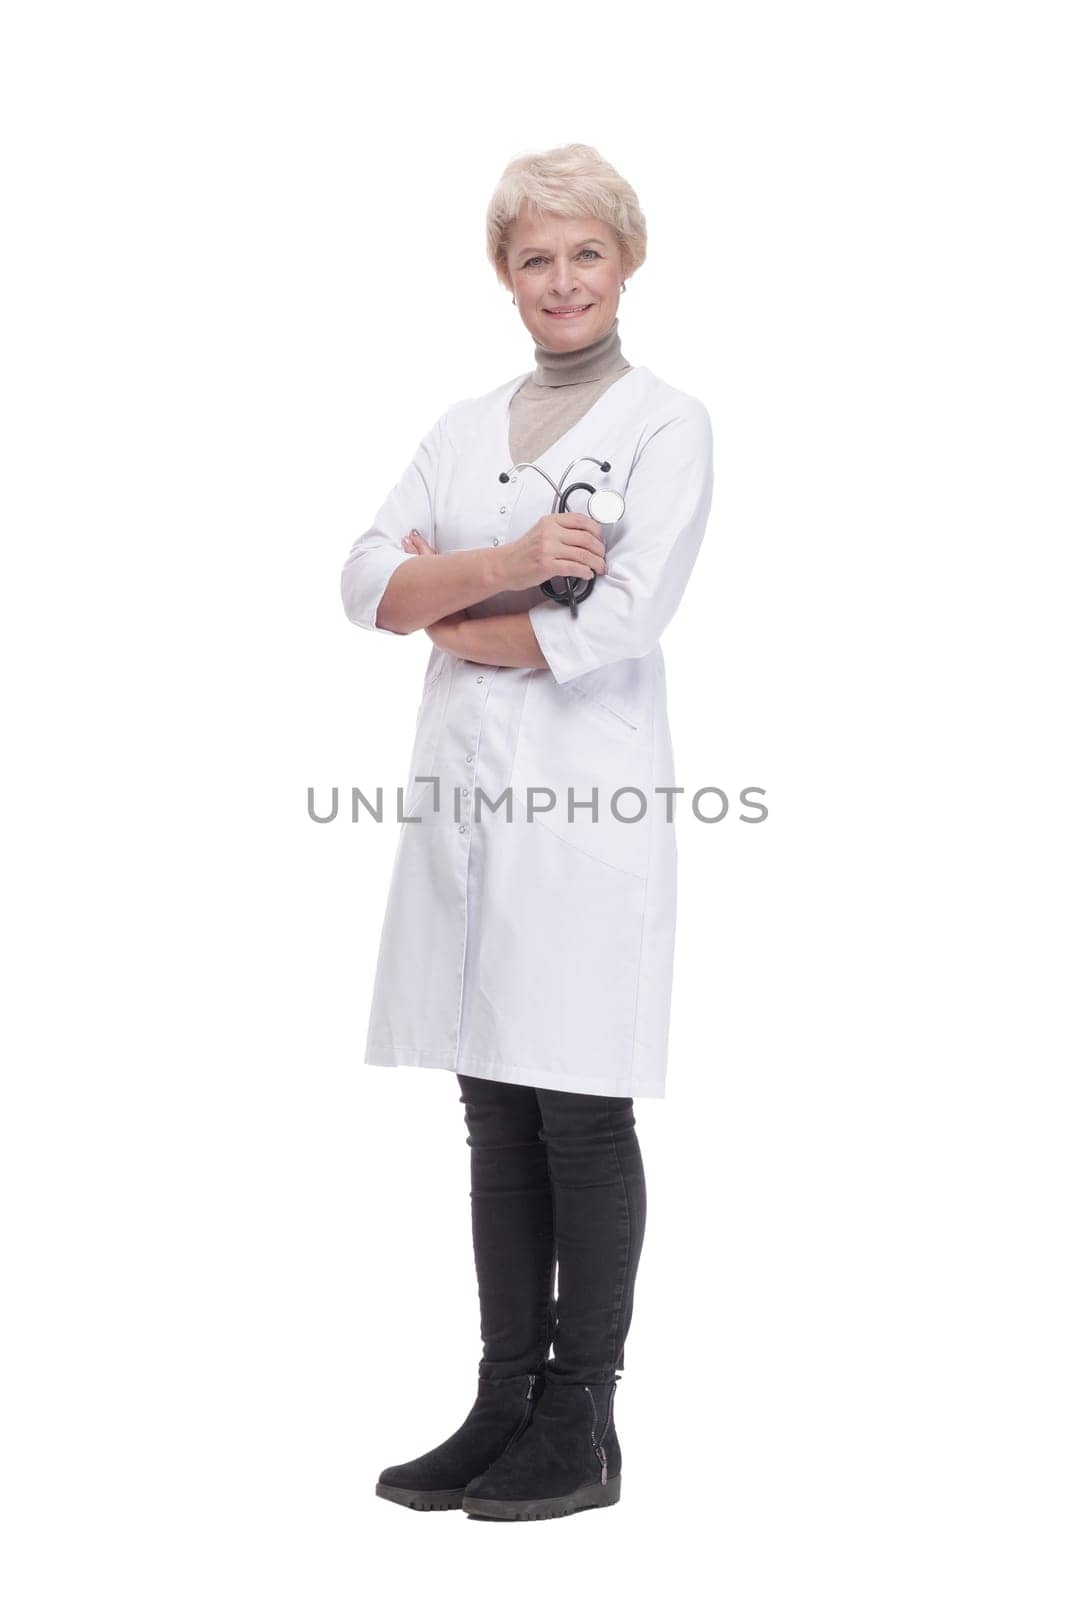 responsible woman doctor with a stethoscope in her hands . isolated on a white background.